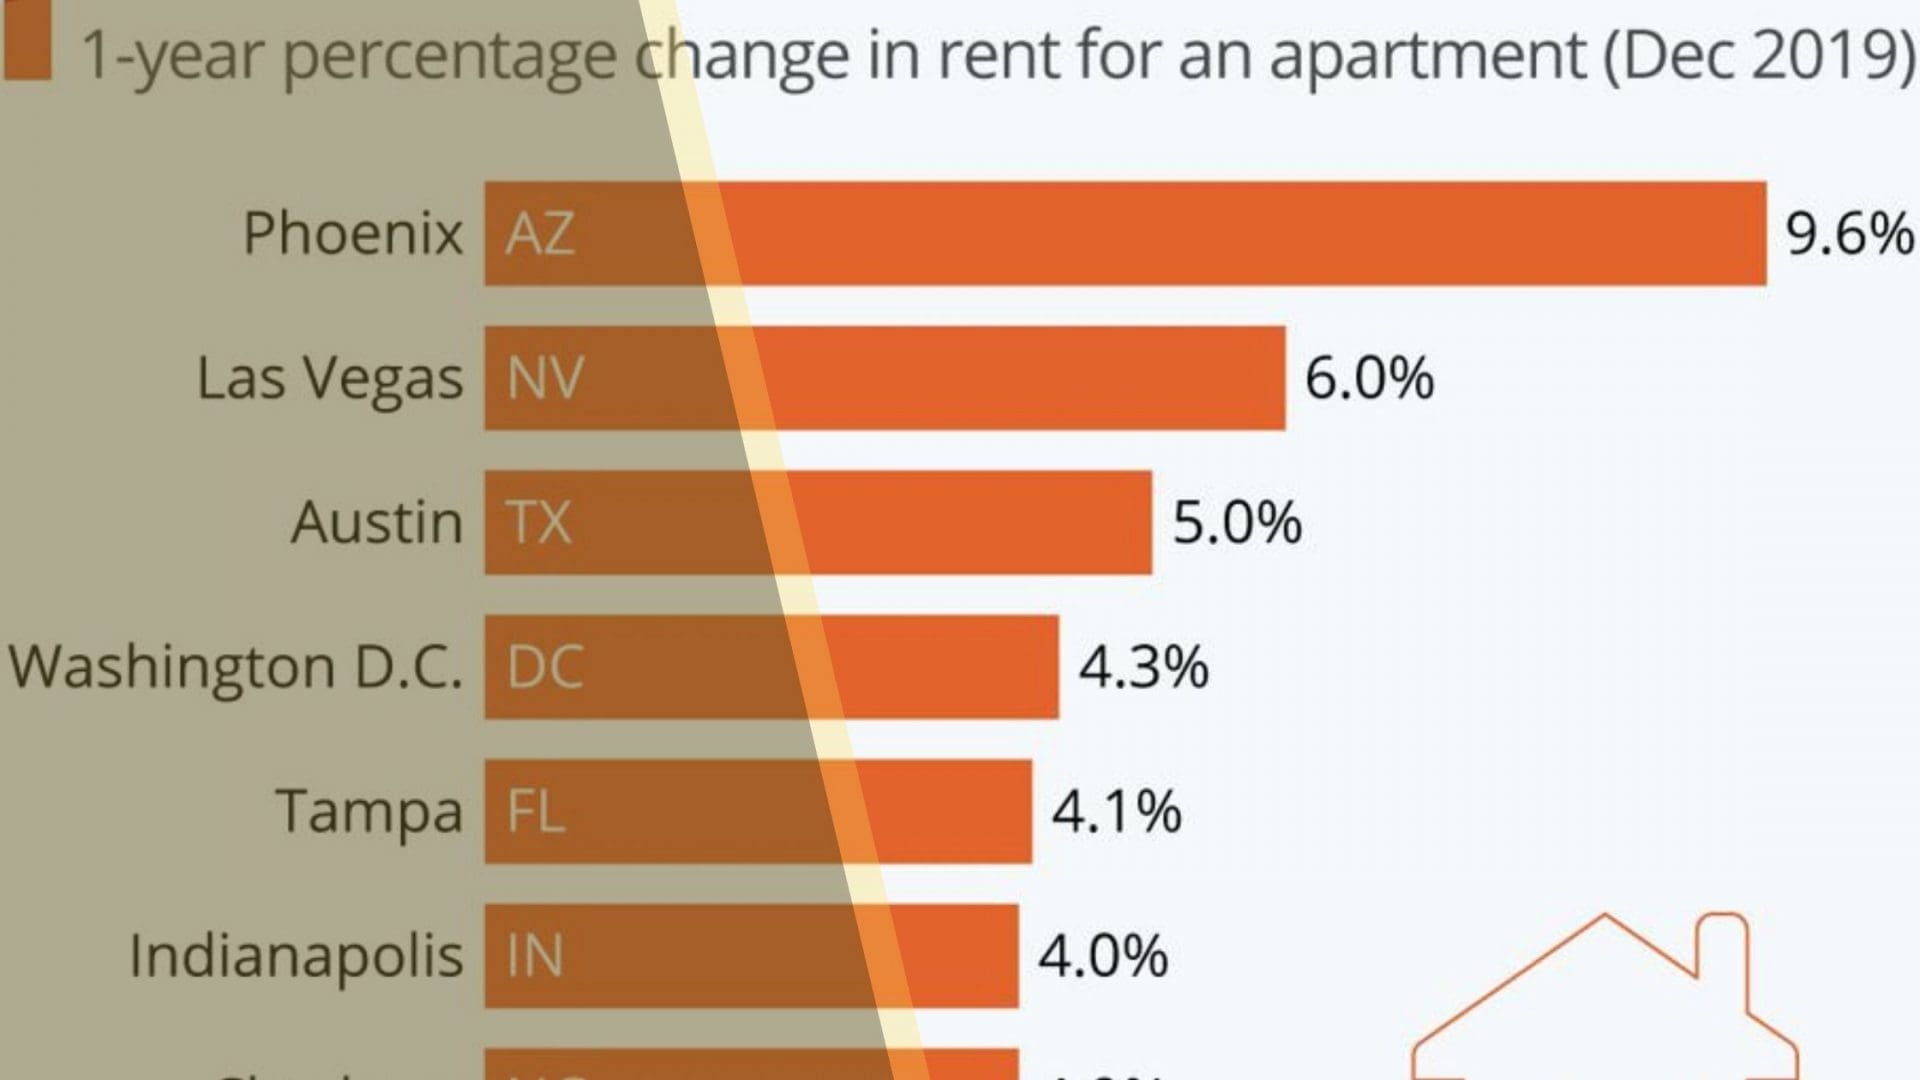 Top 7 Common Prejudices About Why Rent Is Rising In The U.S. (2)